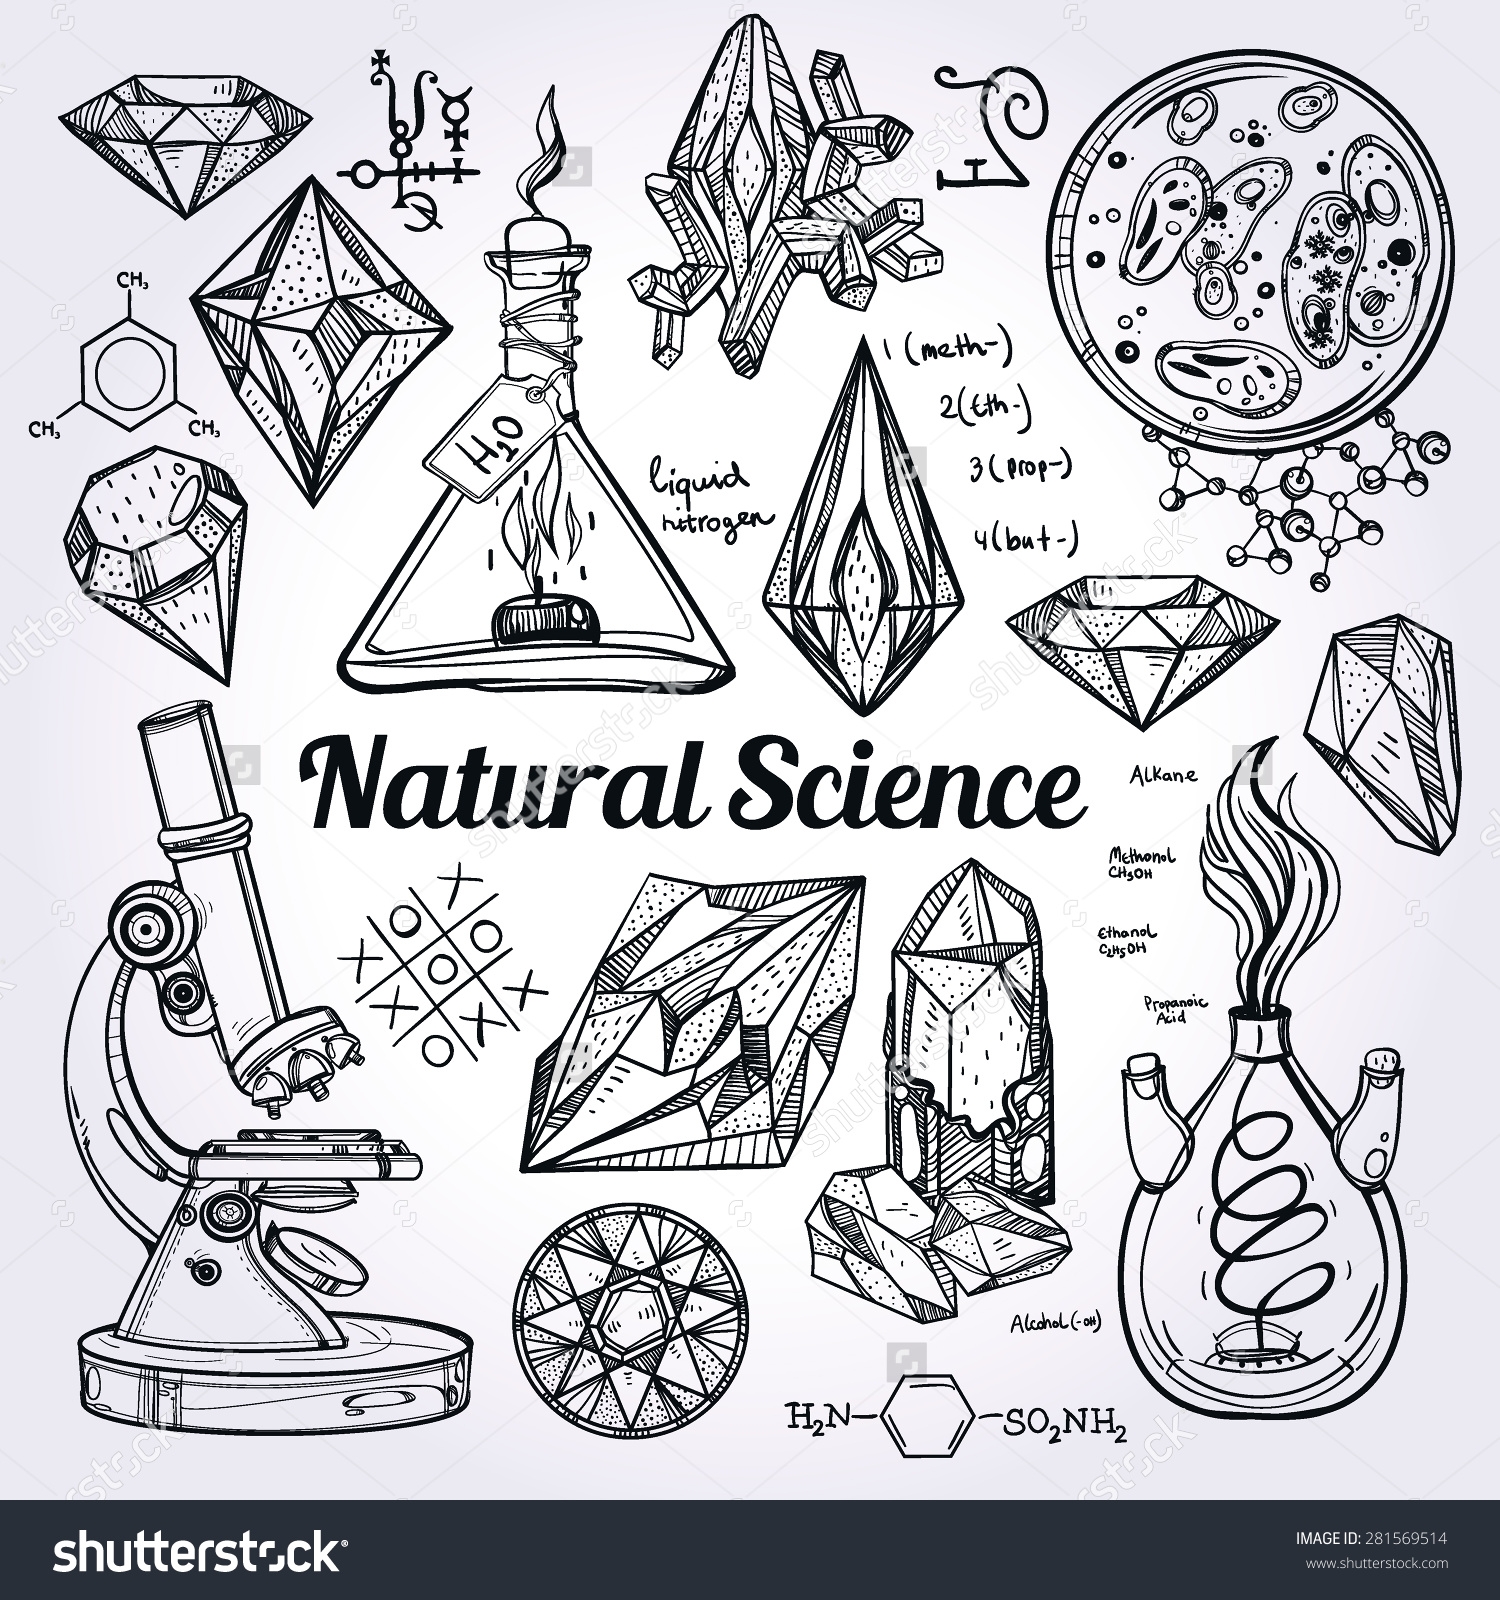 Natural science clipart.